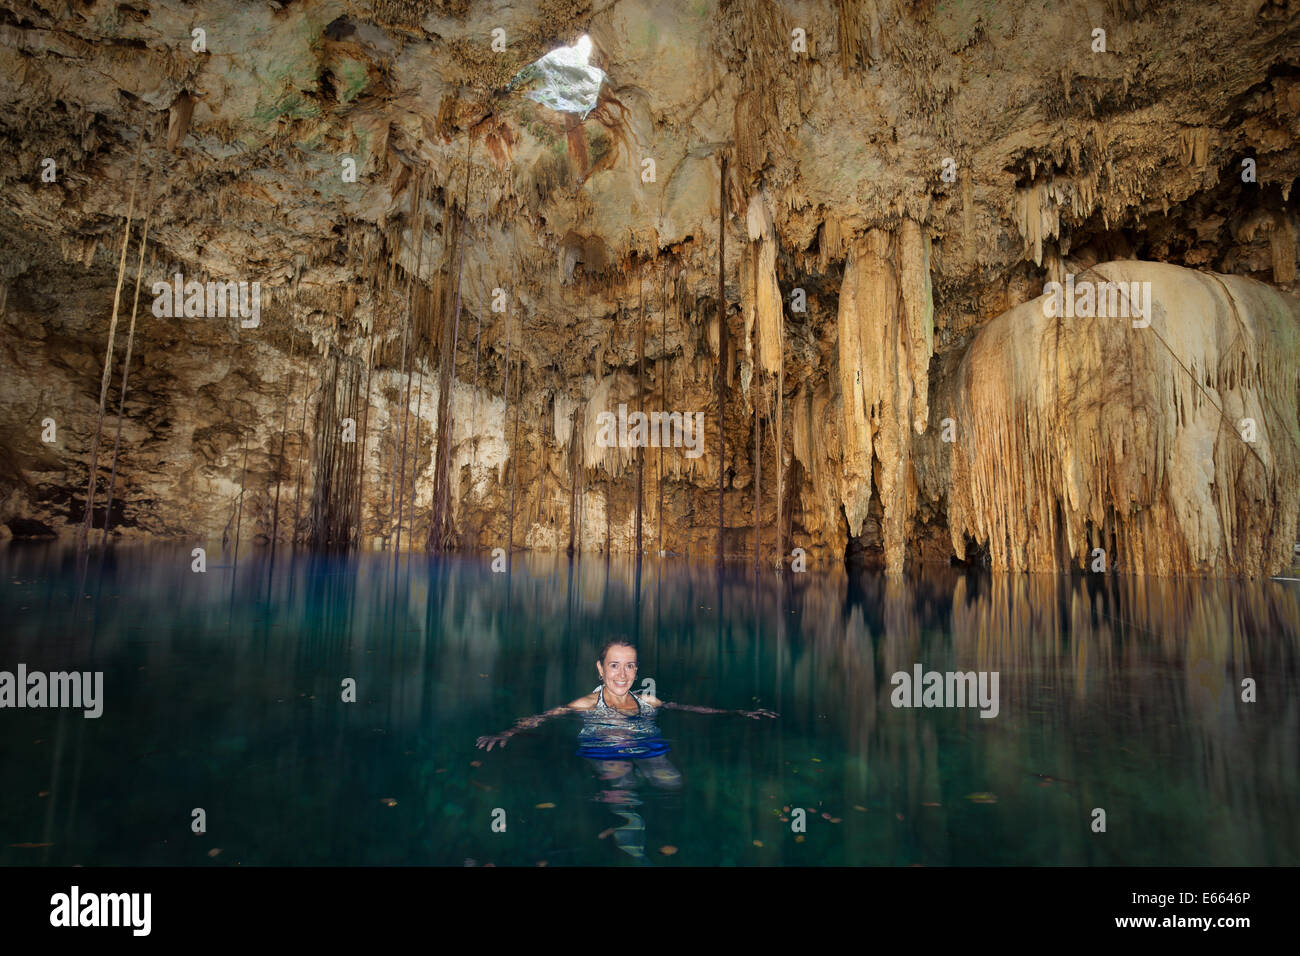 A woman enjoys an early morning swim in the  cenote near Valladolid, Yucatan, Mexico. Stock Photo